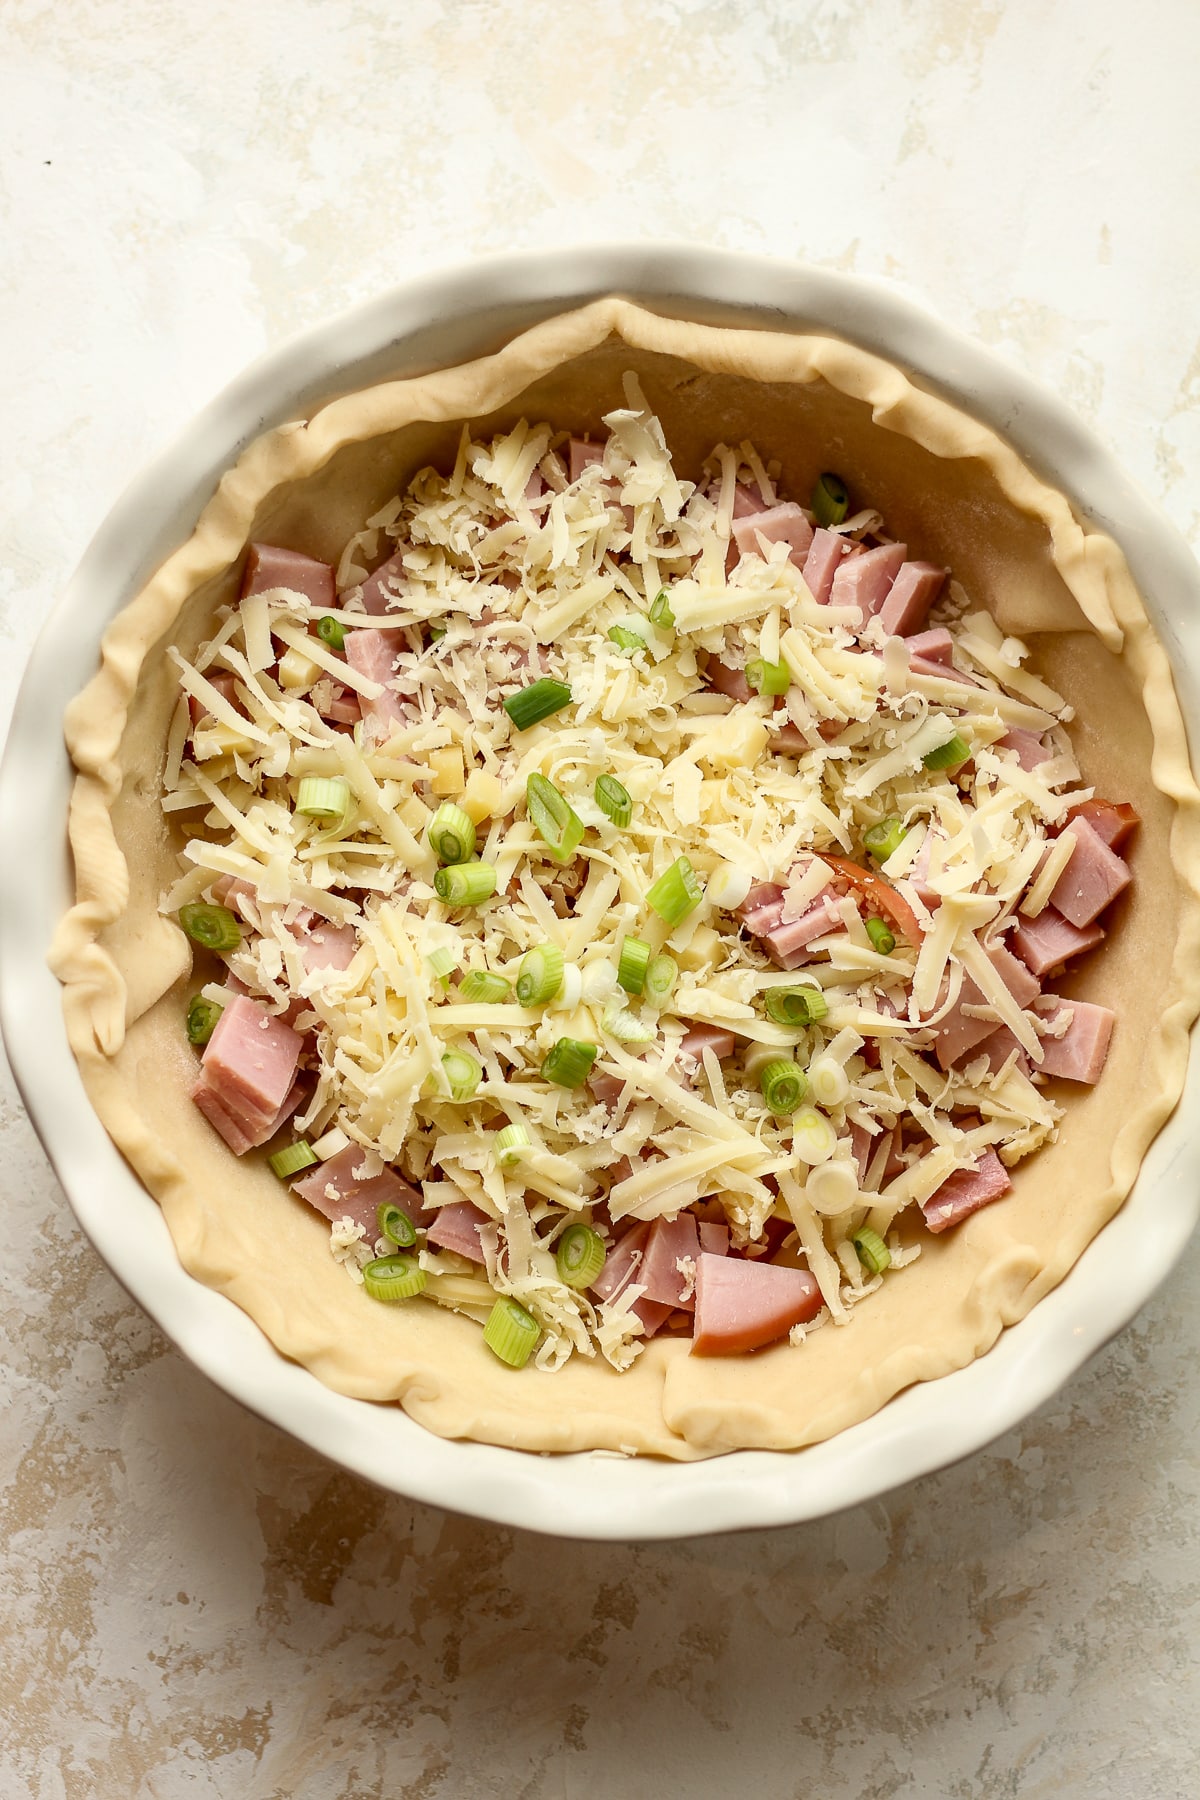 A pie crust with ham, cheese, and green onions.